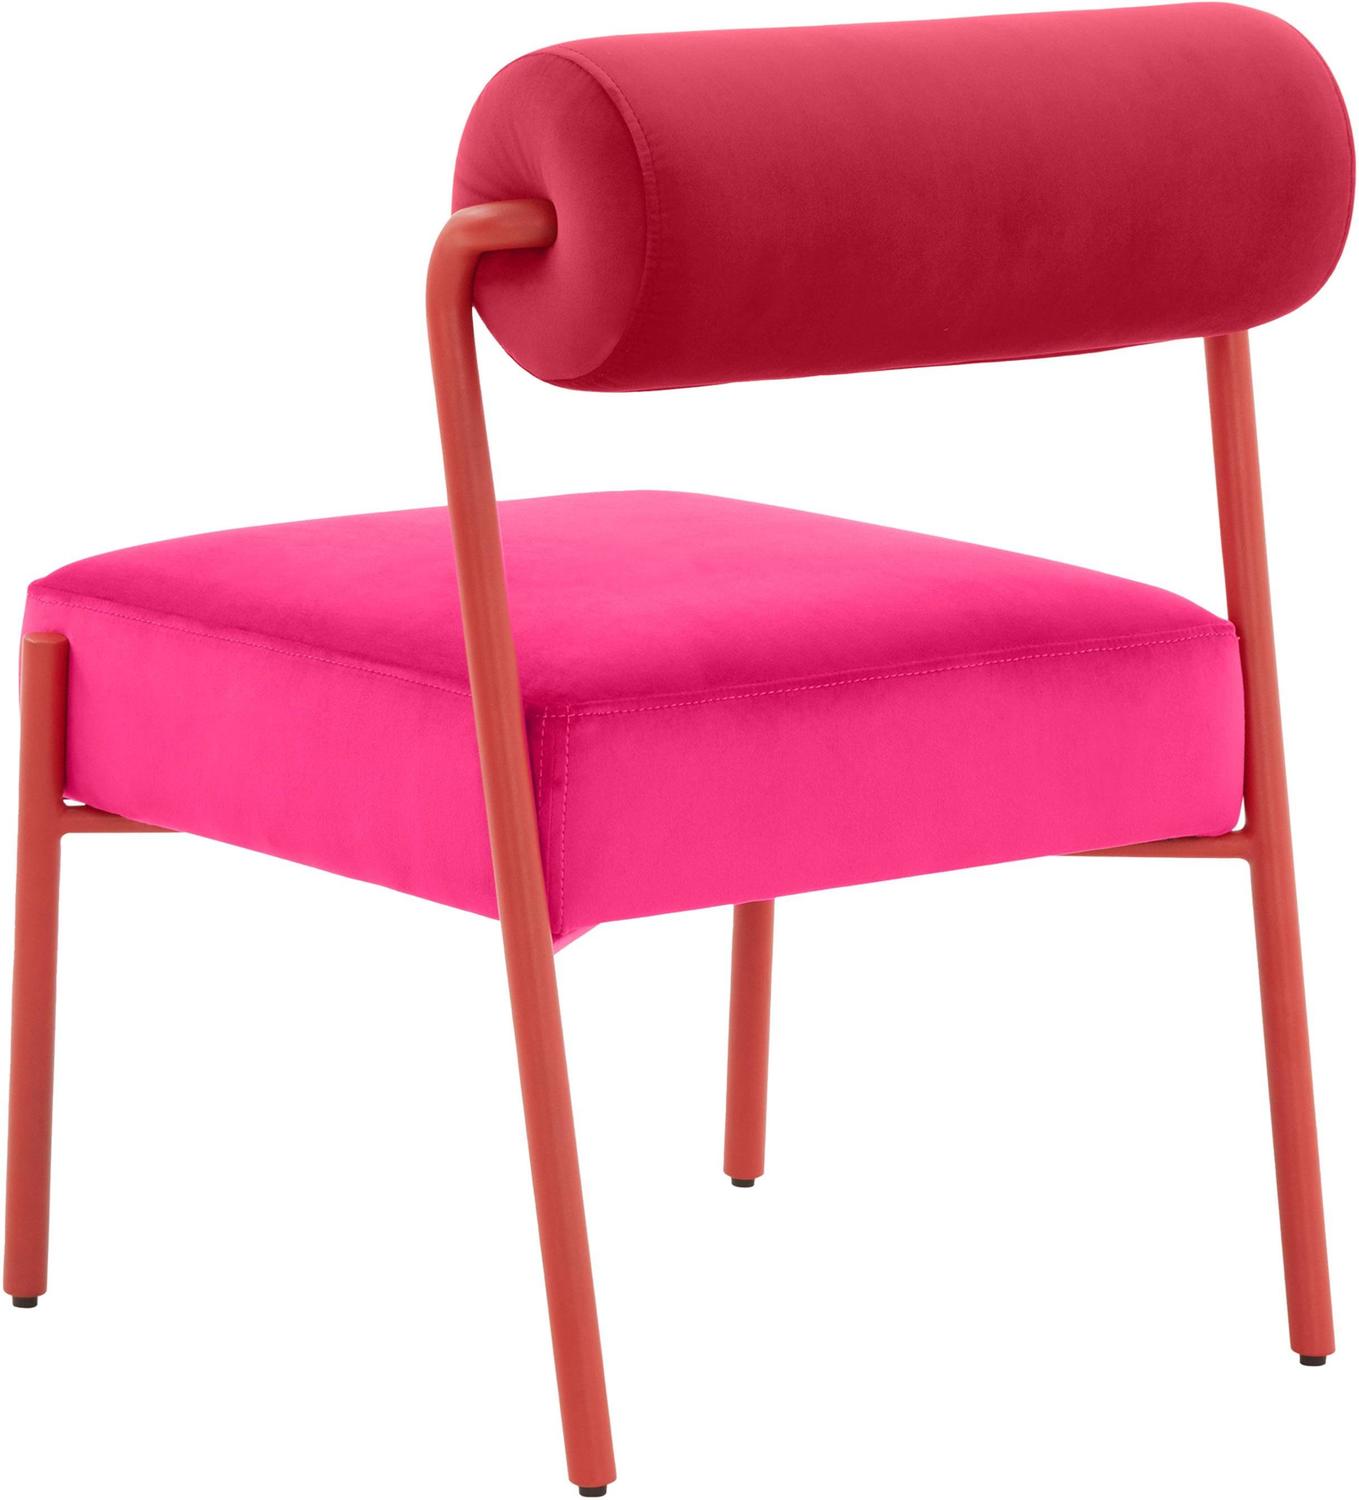 comfortable wood chair Contemporary Design Furniture Dining Chairs Pink